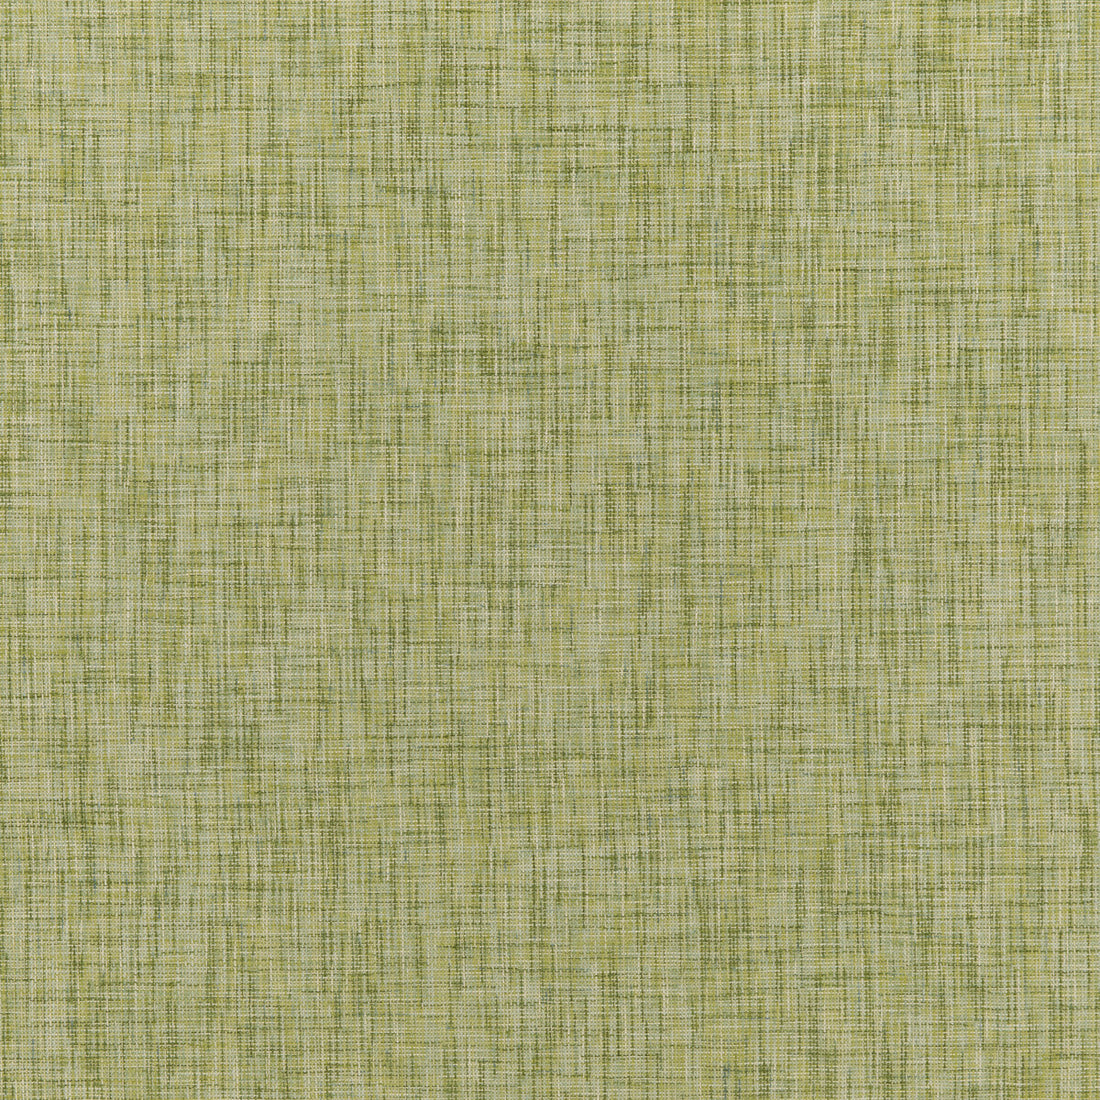 Temae Texture fabric in leaf color - pattern 8018107.3.0 - by Brunschwig &amp; Fils in the Baret collection